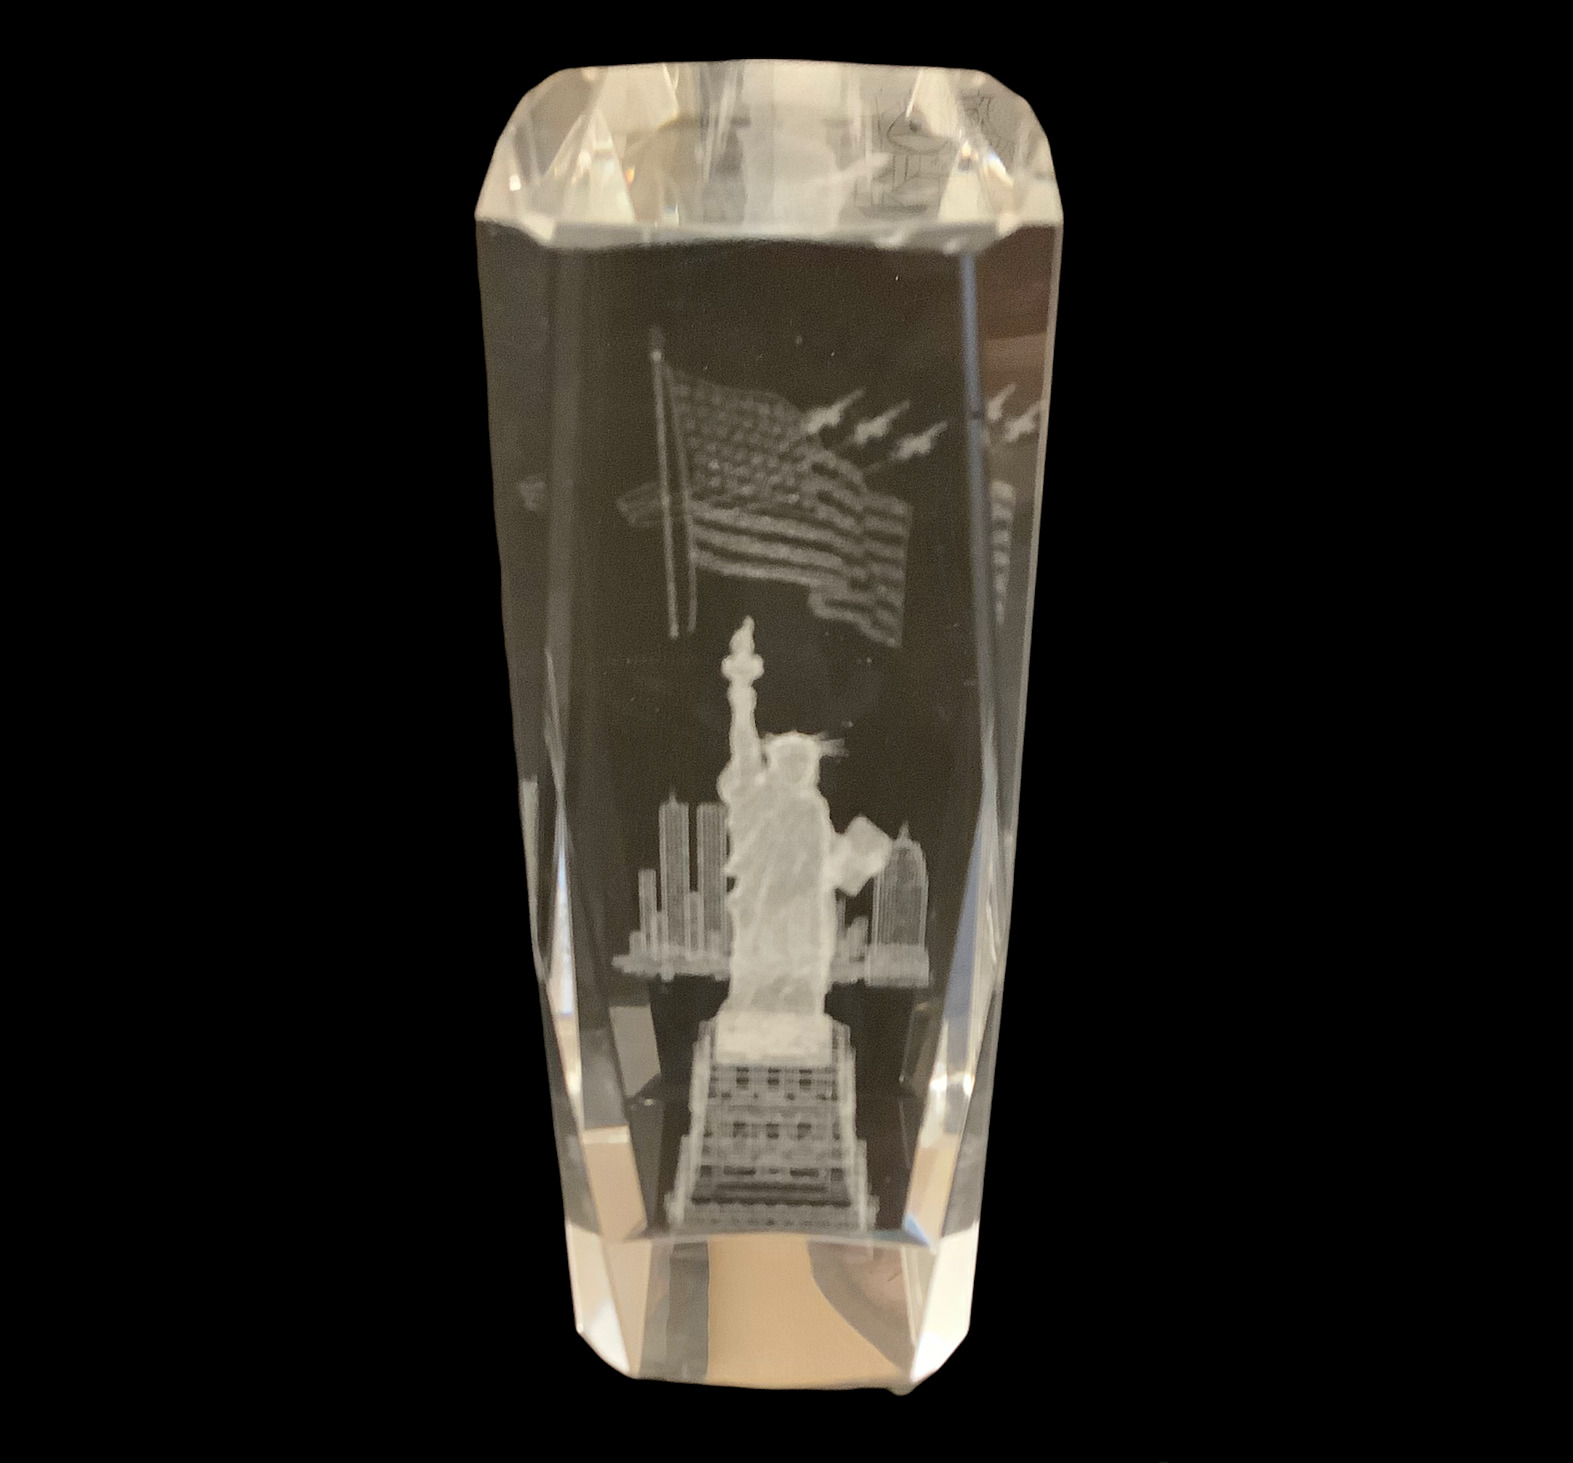 Laser Etched 3D Vintage Crystal Glass Paperweight New York Souvenir Twin Towers